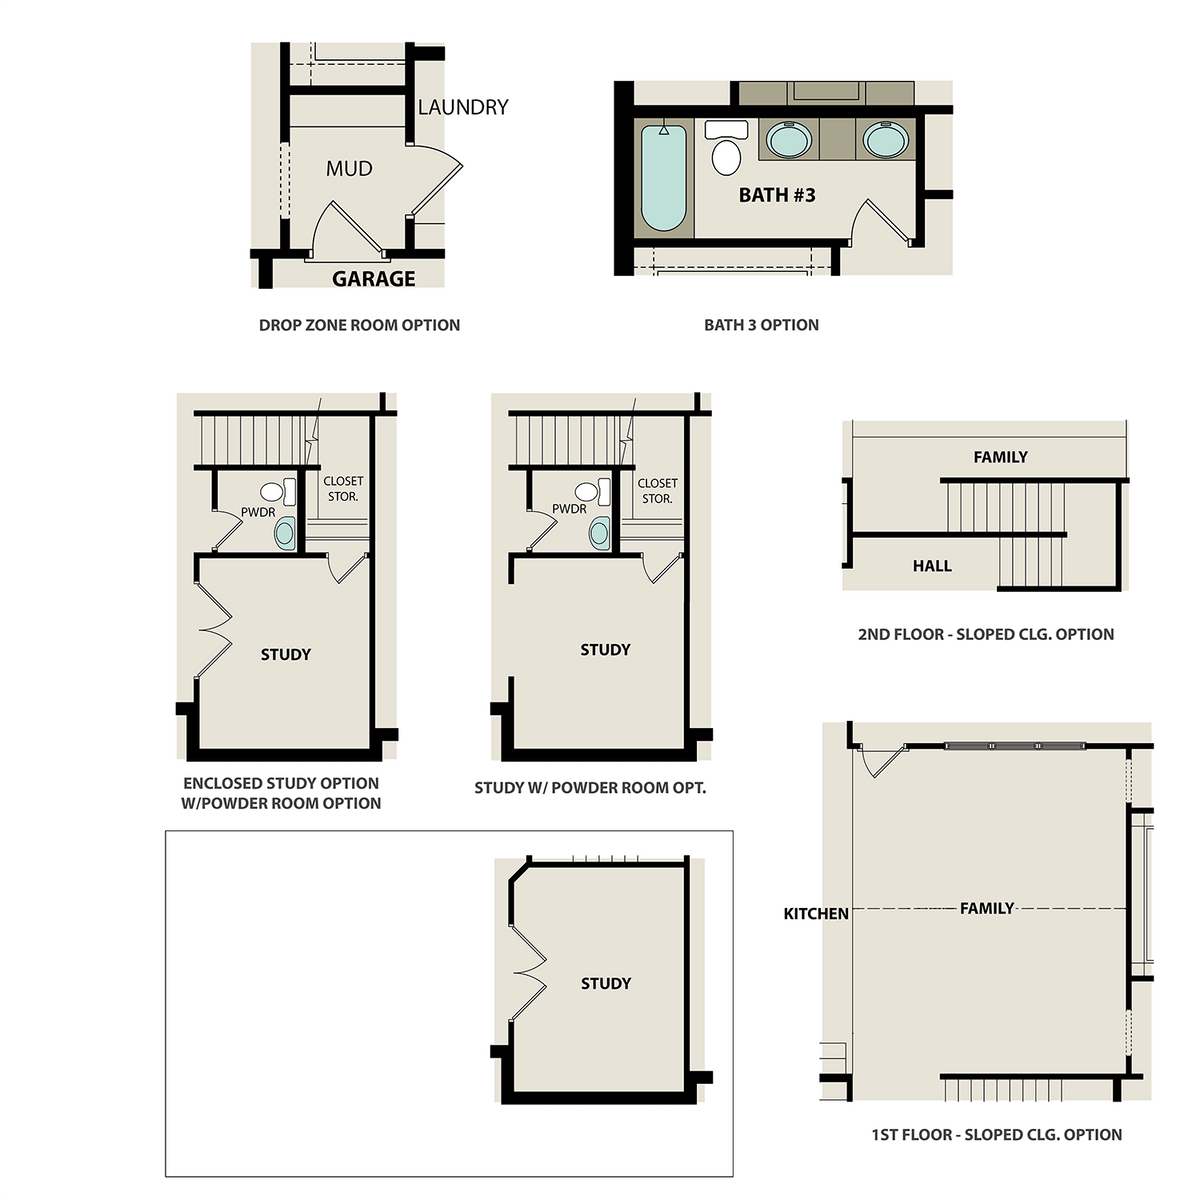 3 - The Bellar B with 3-Car Garage floor plan layout for 2223 Blue Heron Drive in Davidson Homes' Rivers Edge community.